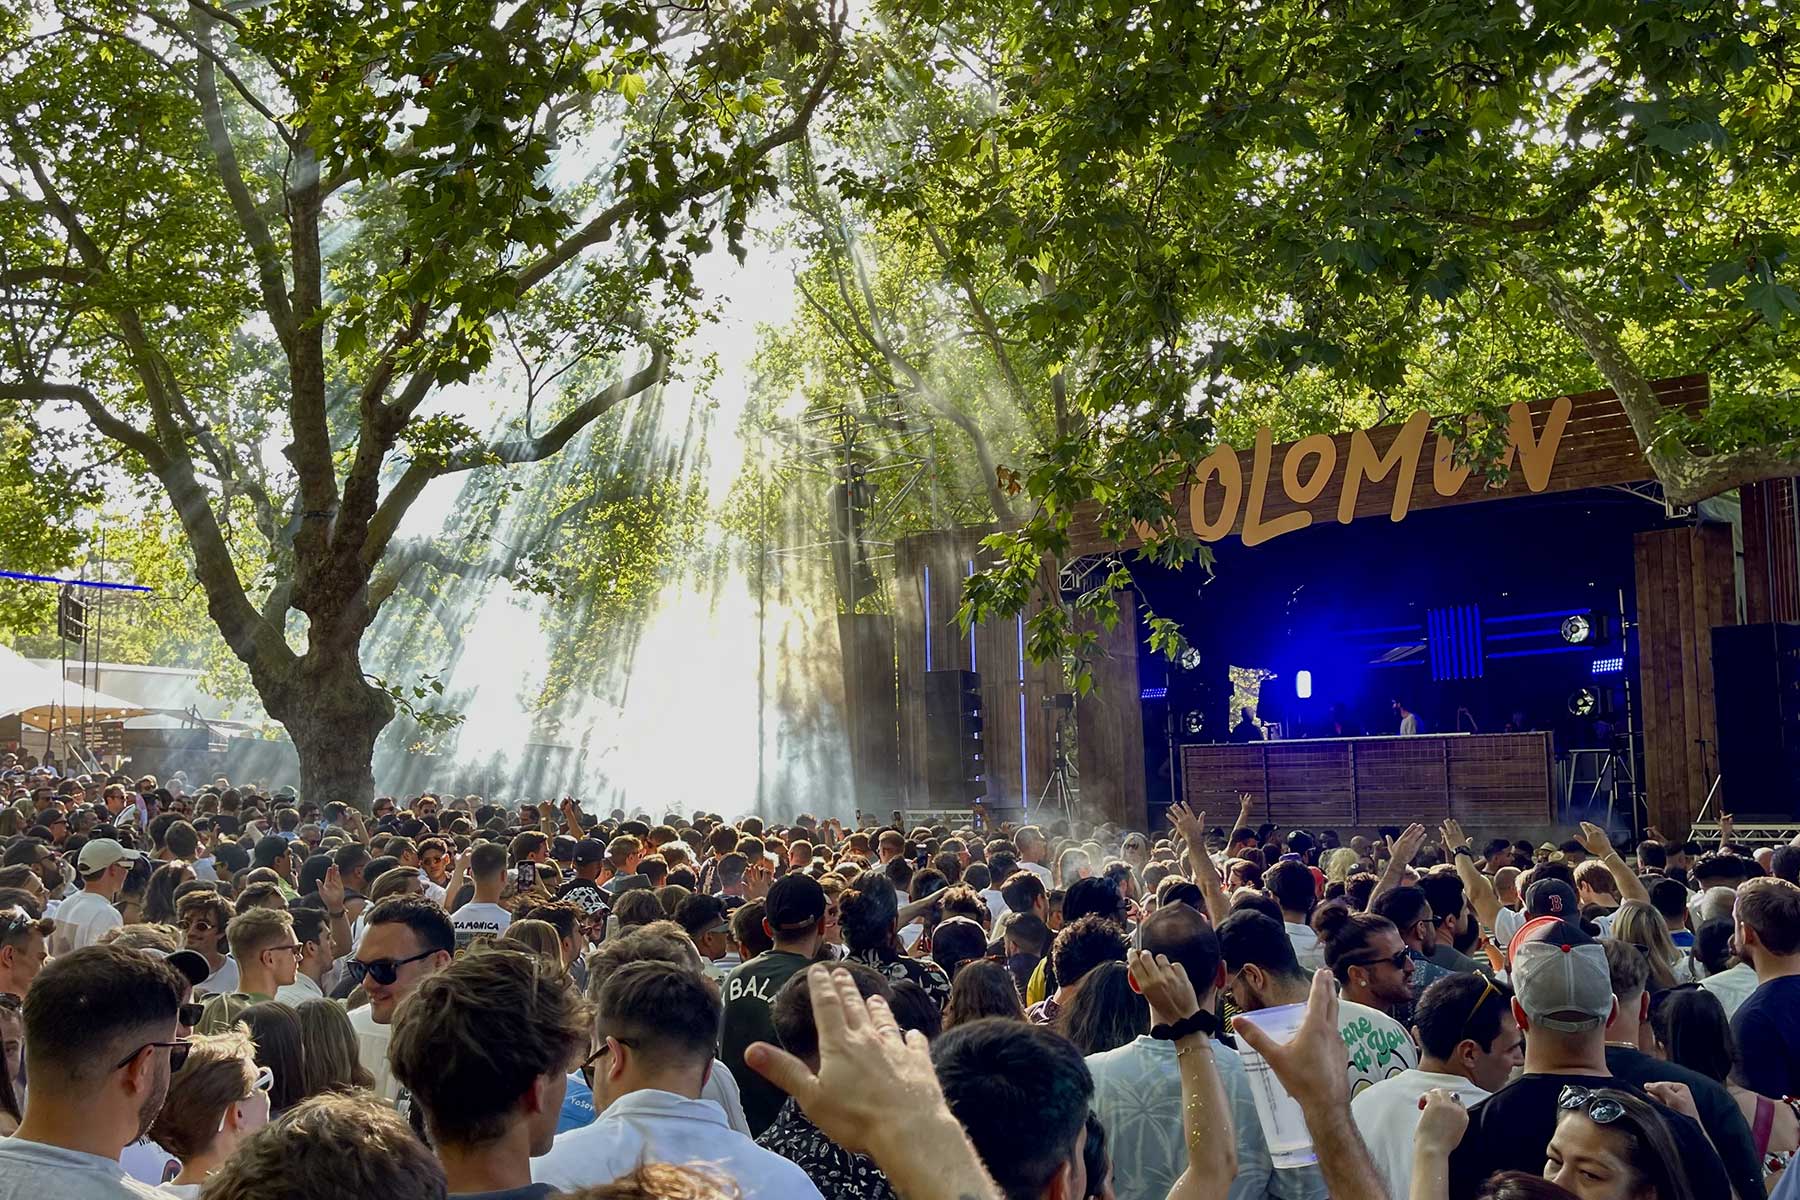 A crowd outdoors watching Solomun